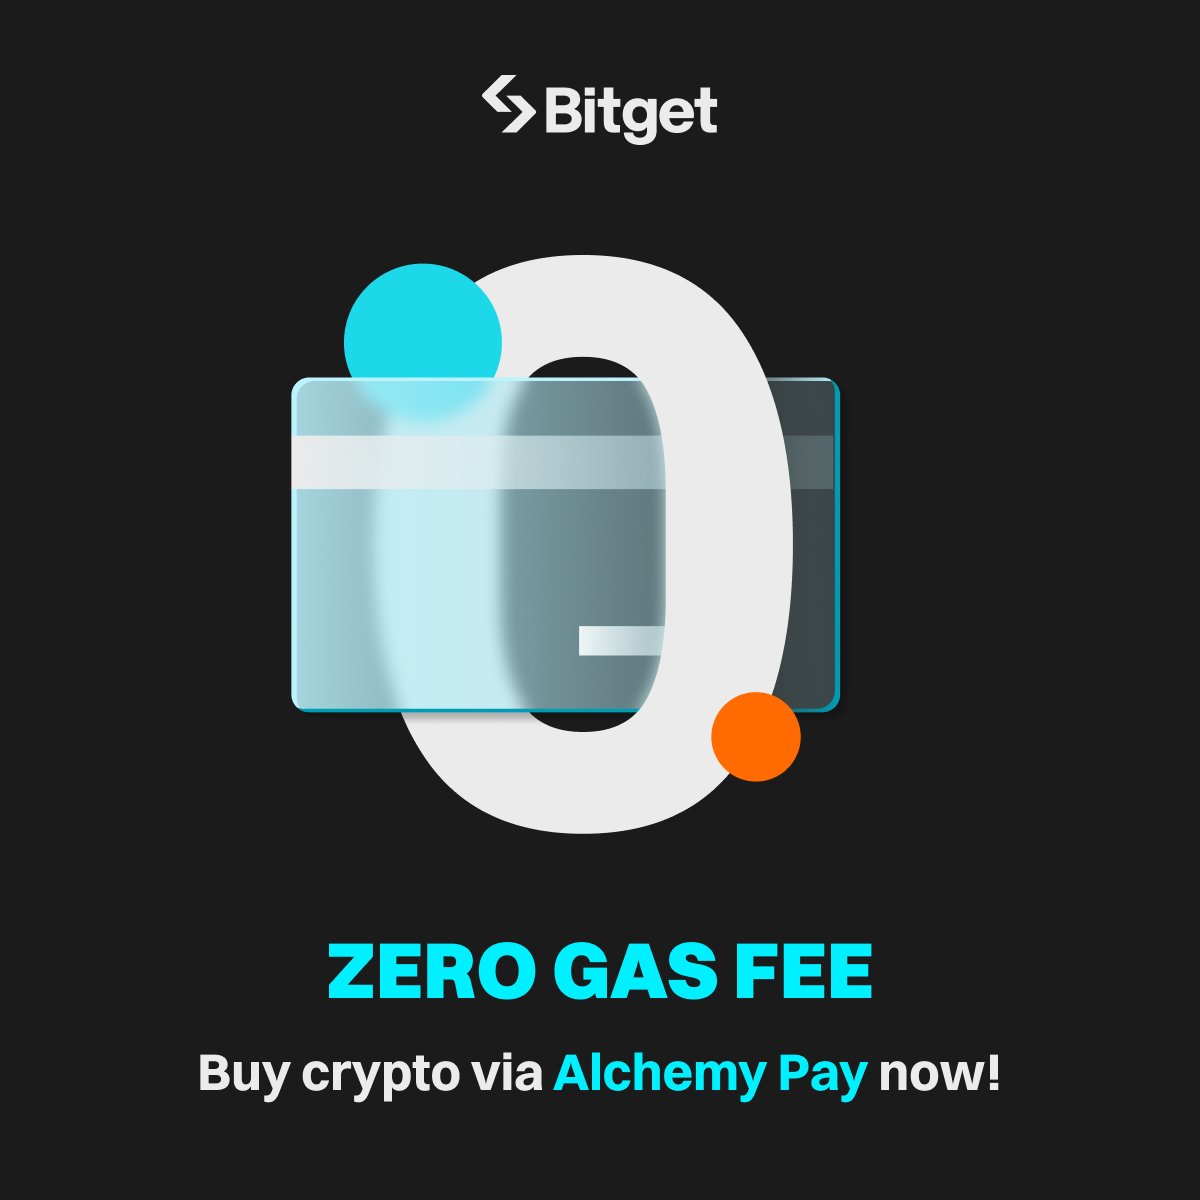 Alchemy Pay @AlchemyPay, a third-party service provider, now supports zero network fees, making crypto trading on #Bitget more accessible and affordable!

Read more 👇
bitget.com/support/articl…